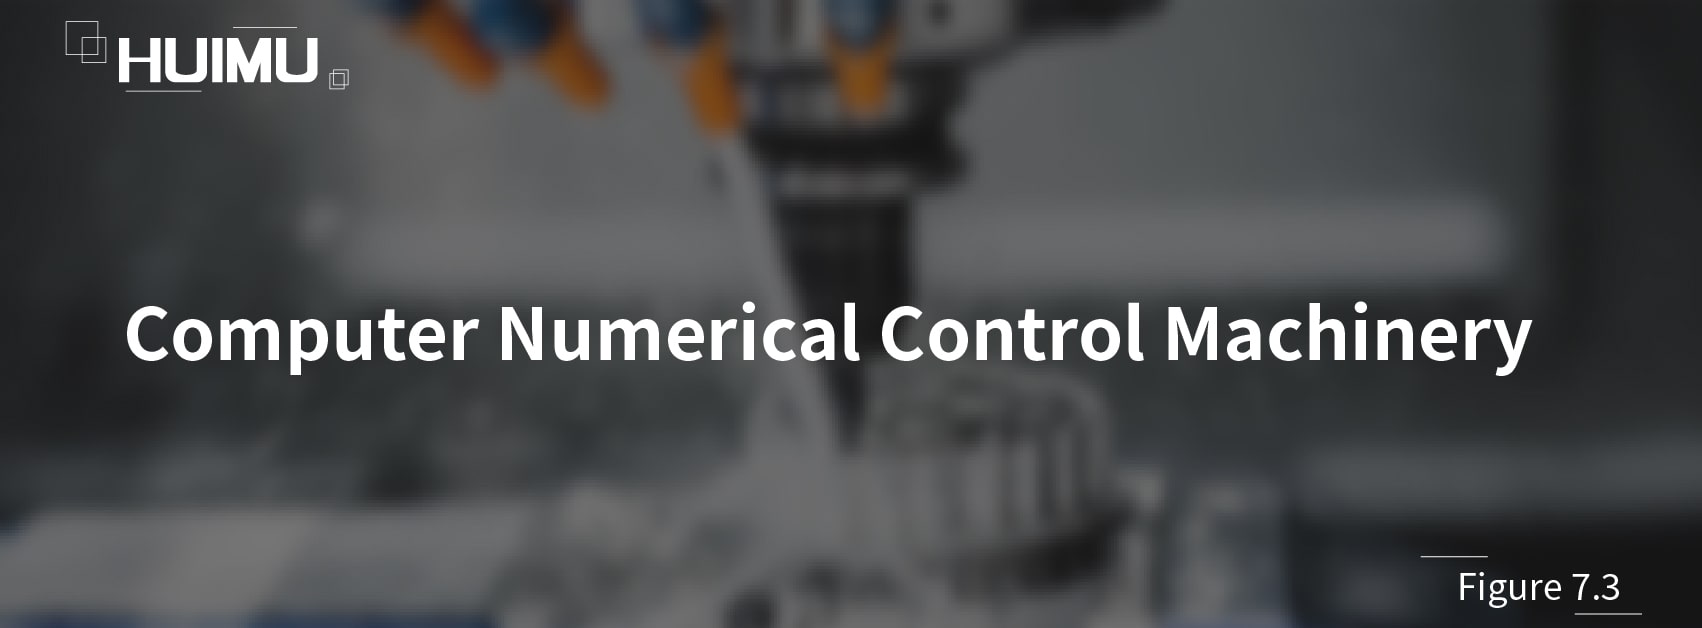 Computer Numerical Control Machinery